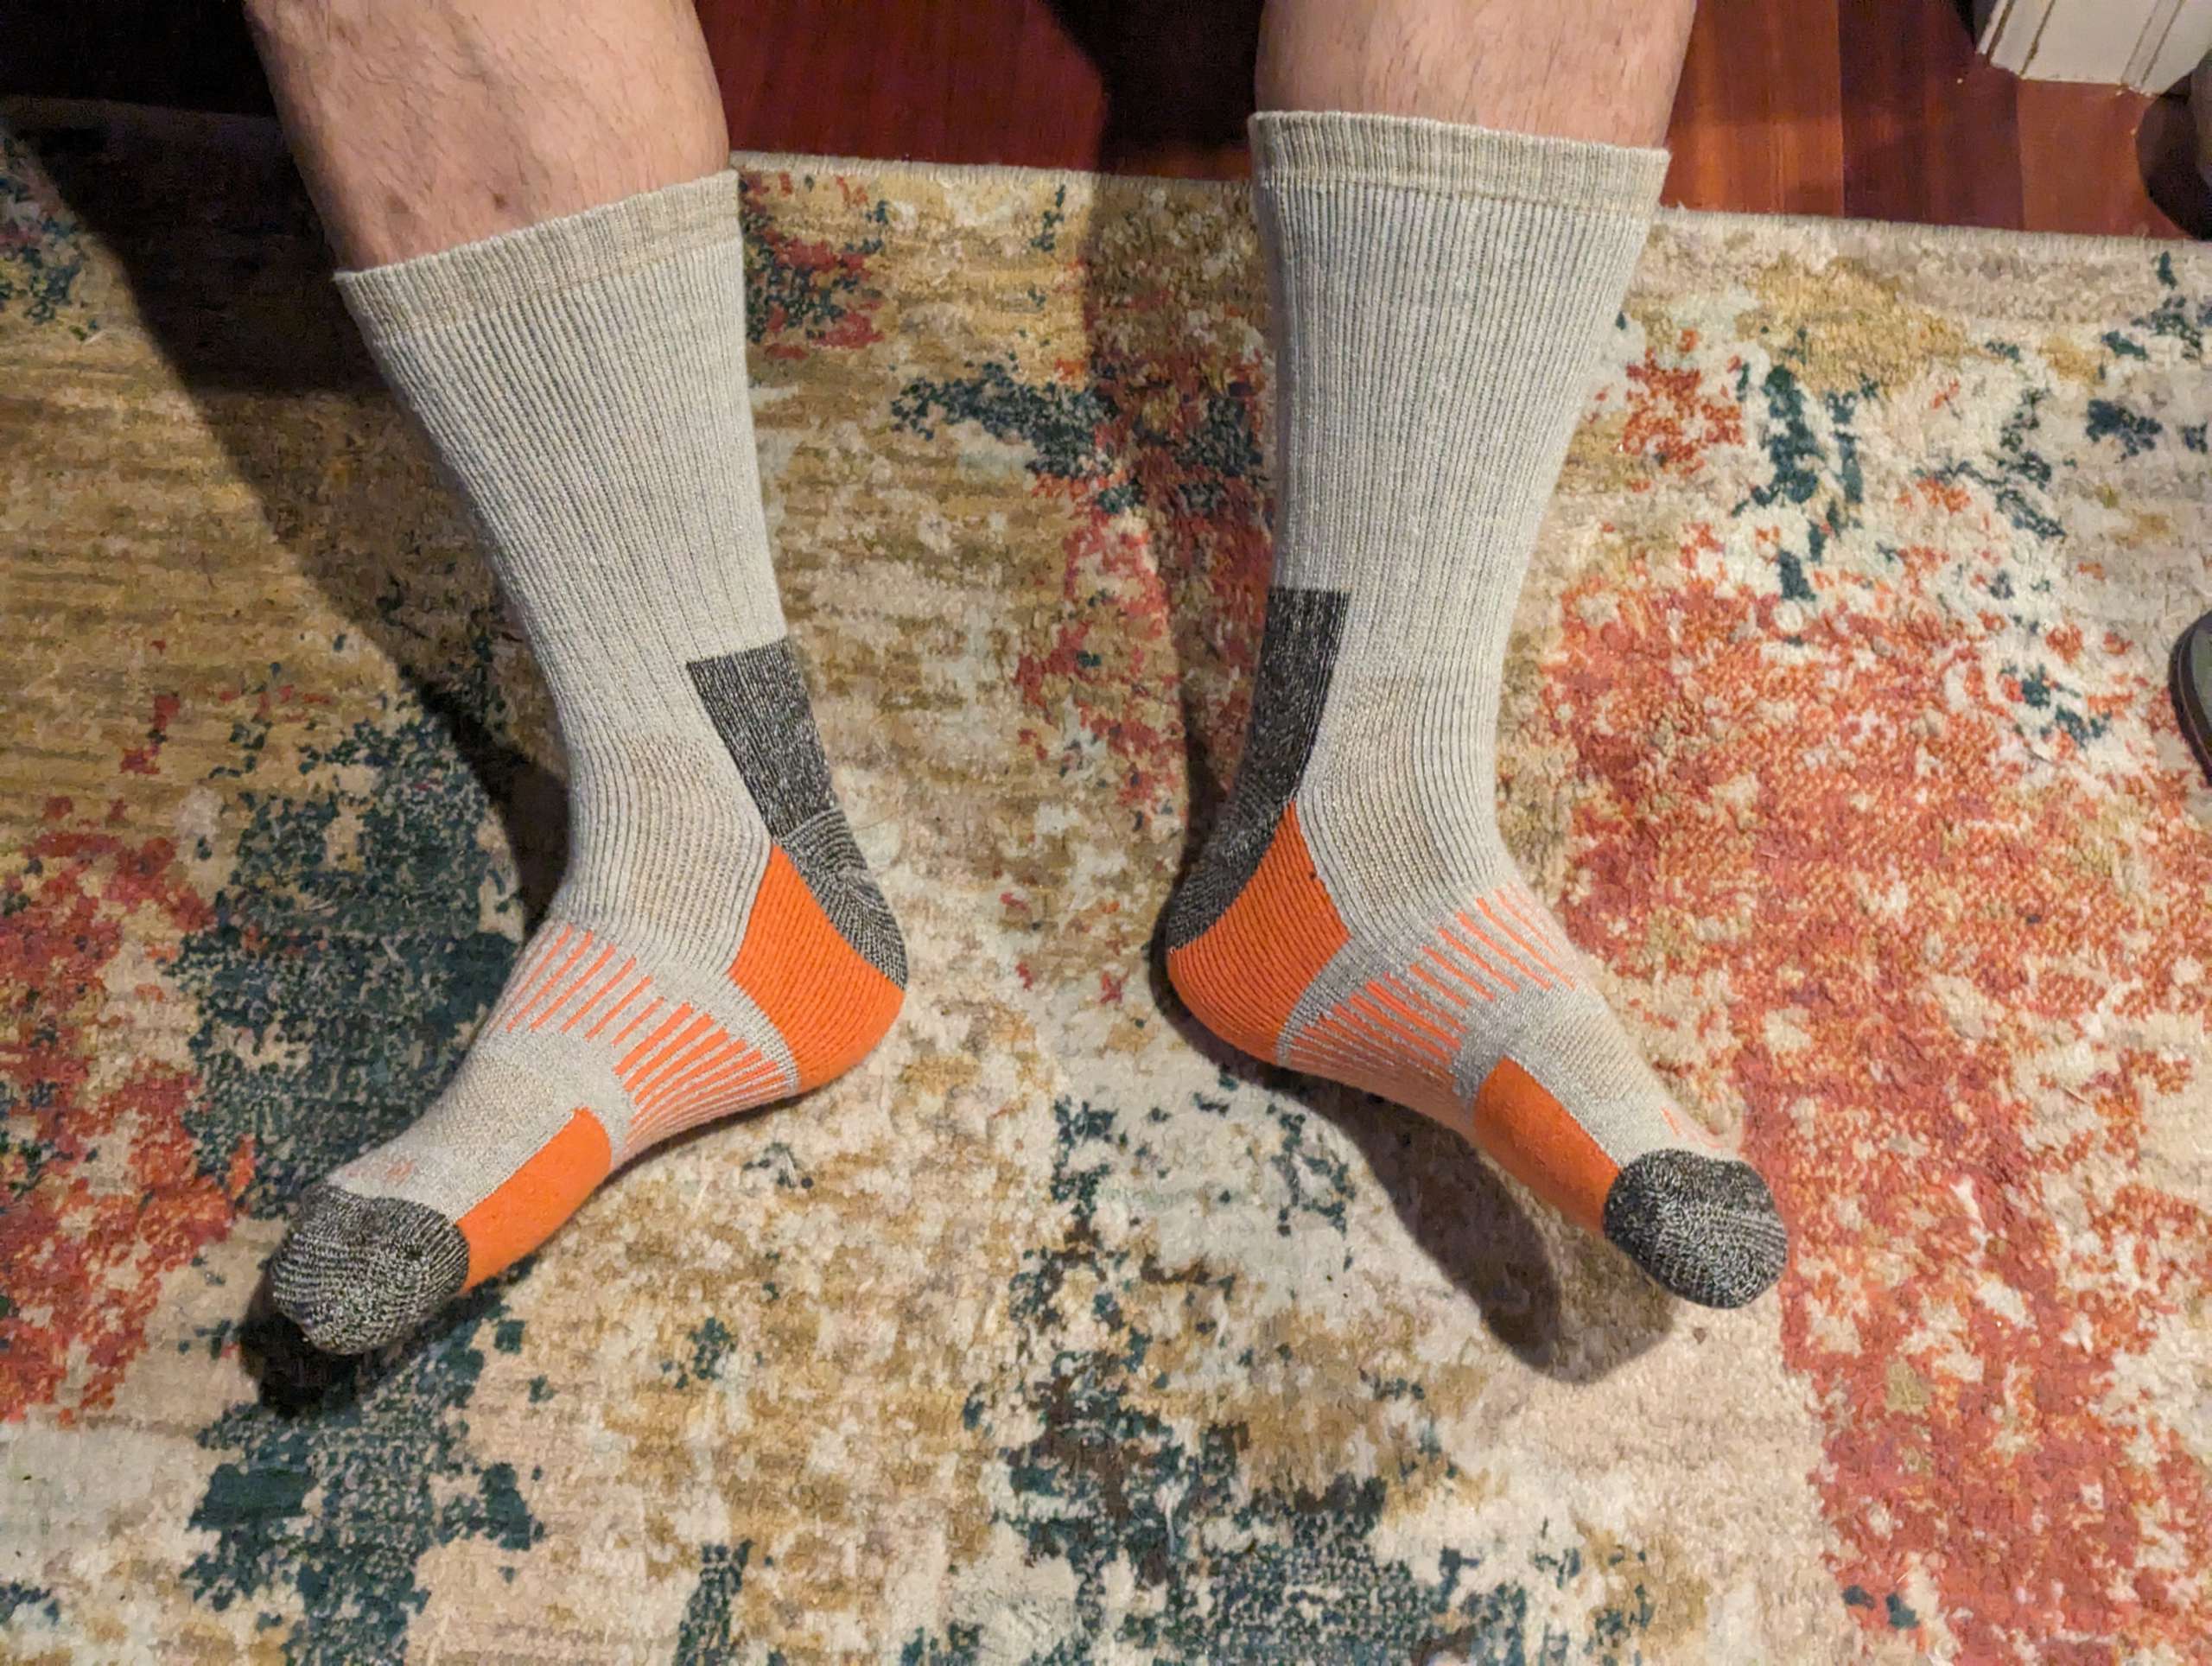 Worn Sock review - the best socks you can get - The Gadgeteer